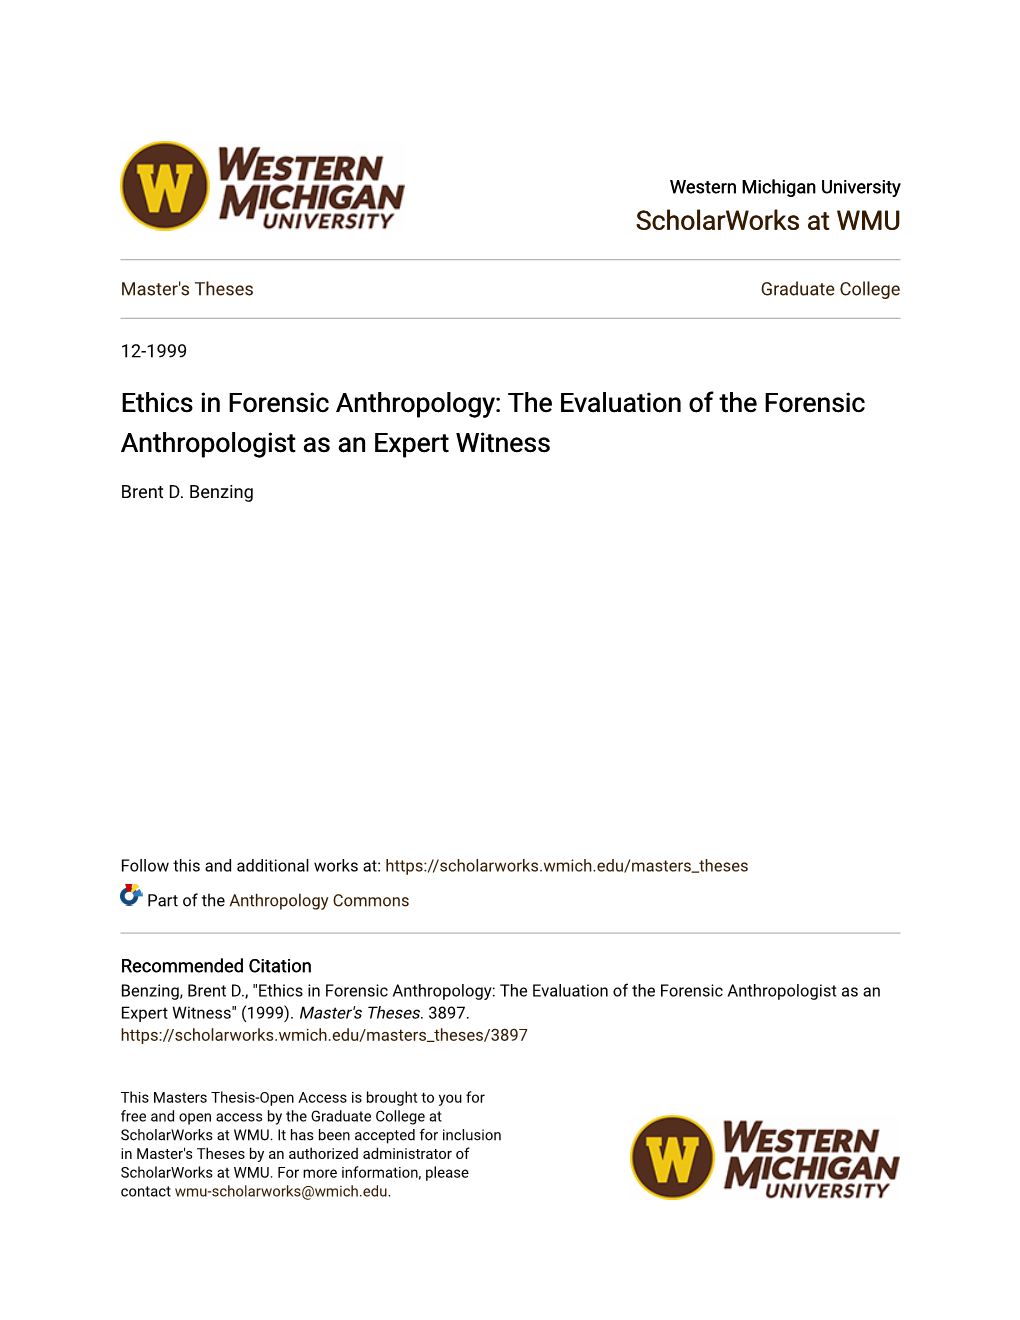 Ethics in Forensic Anthropology: the Evaluation of the Forensic Anthropologist As an Expert Witness